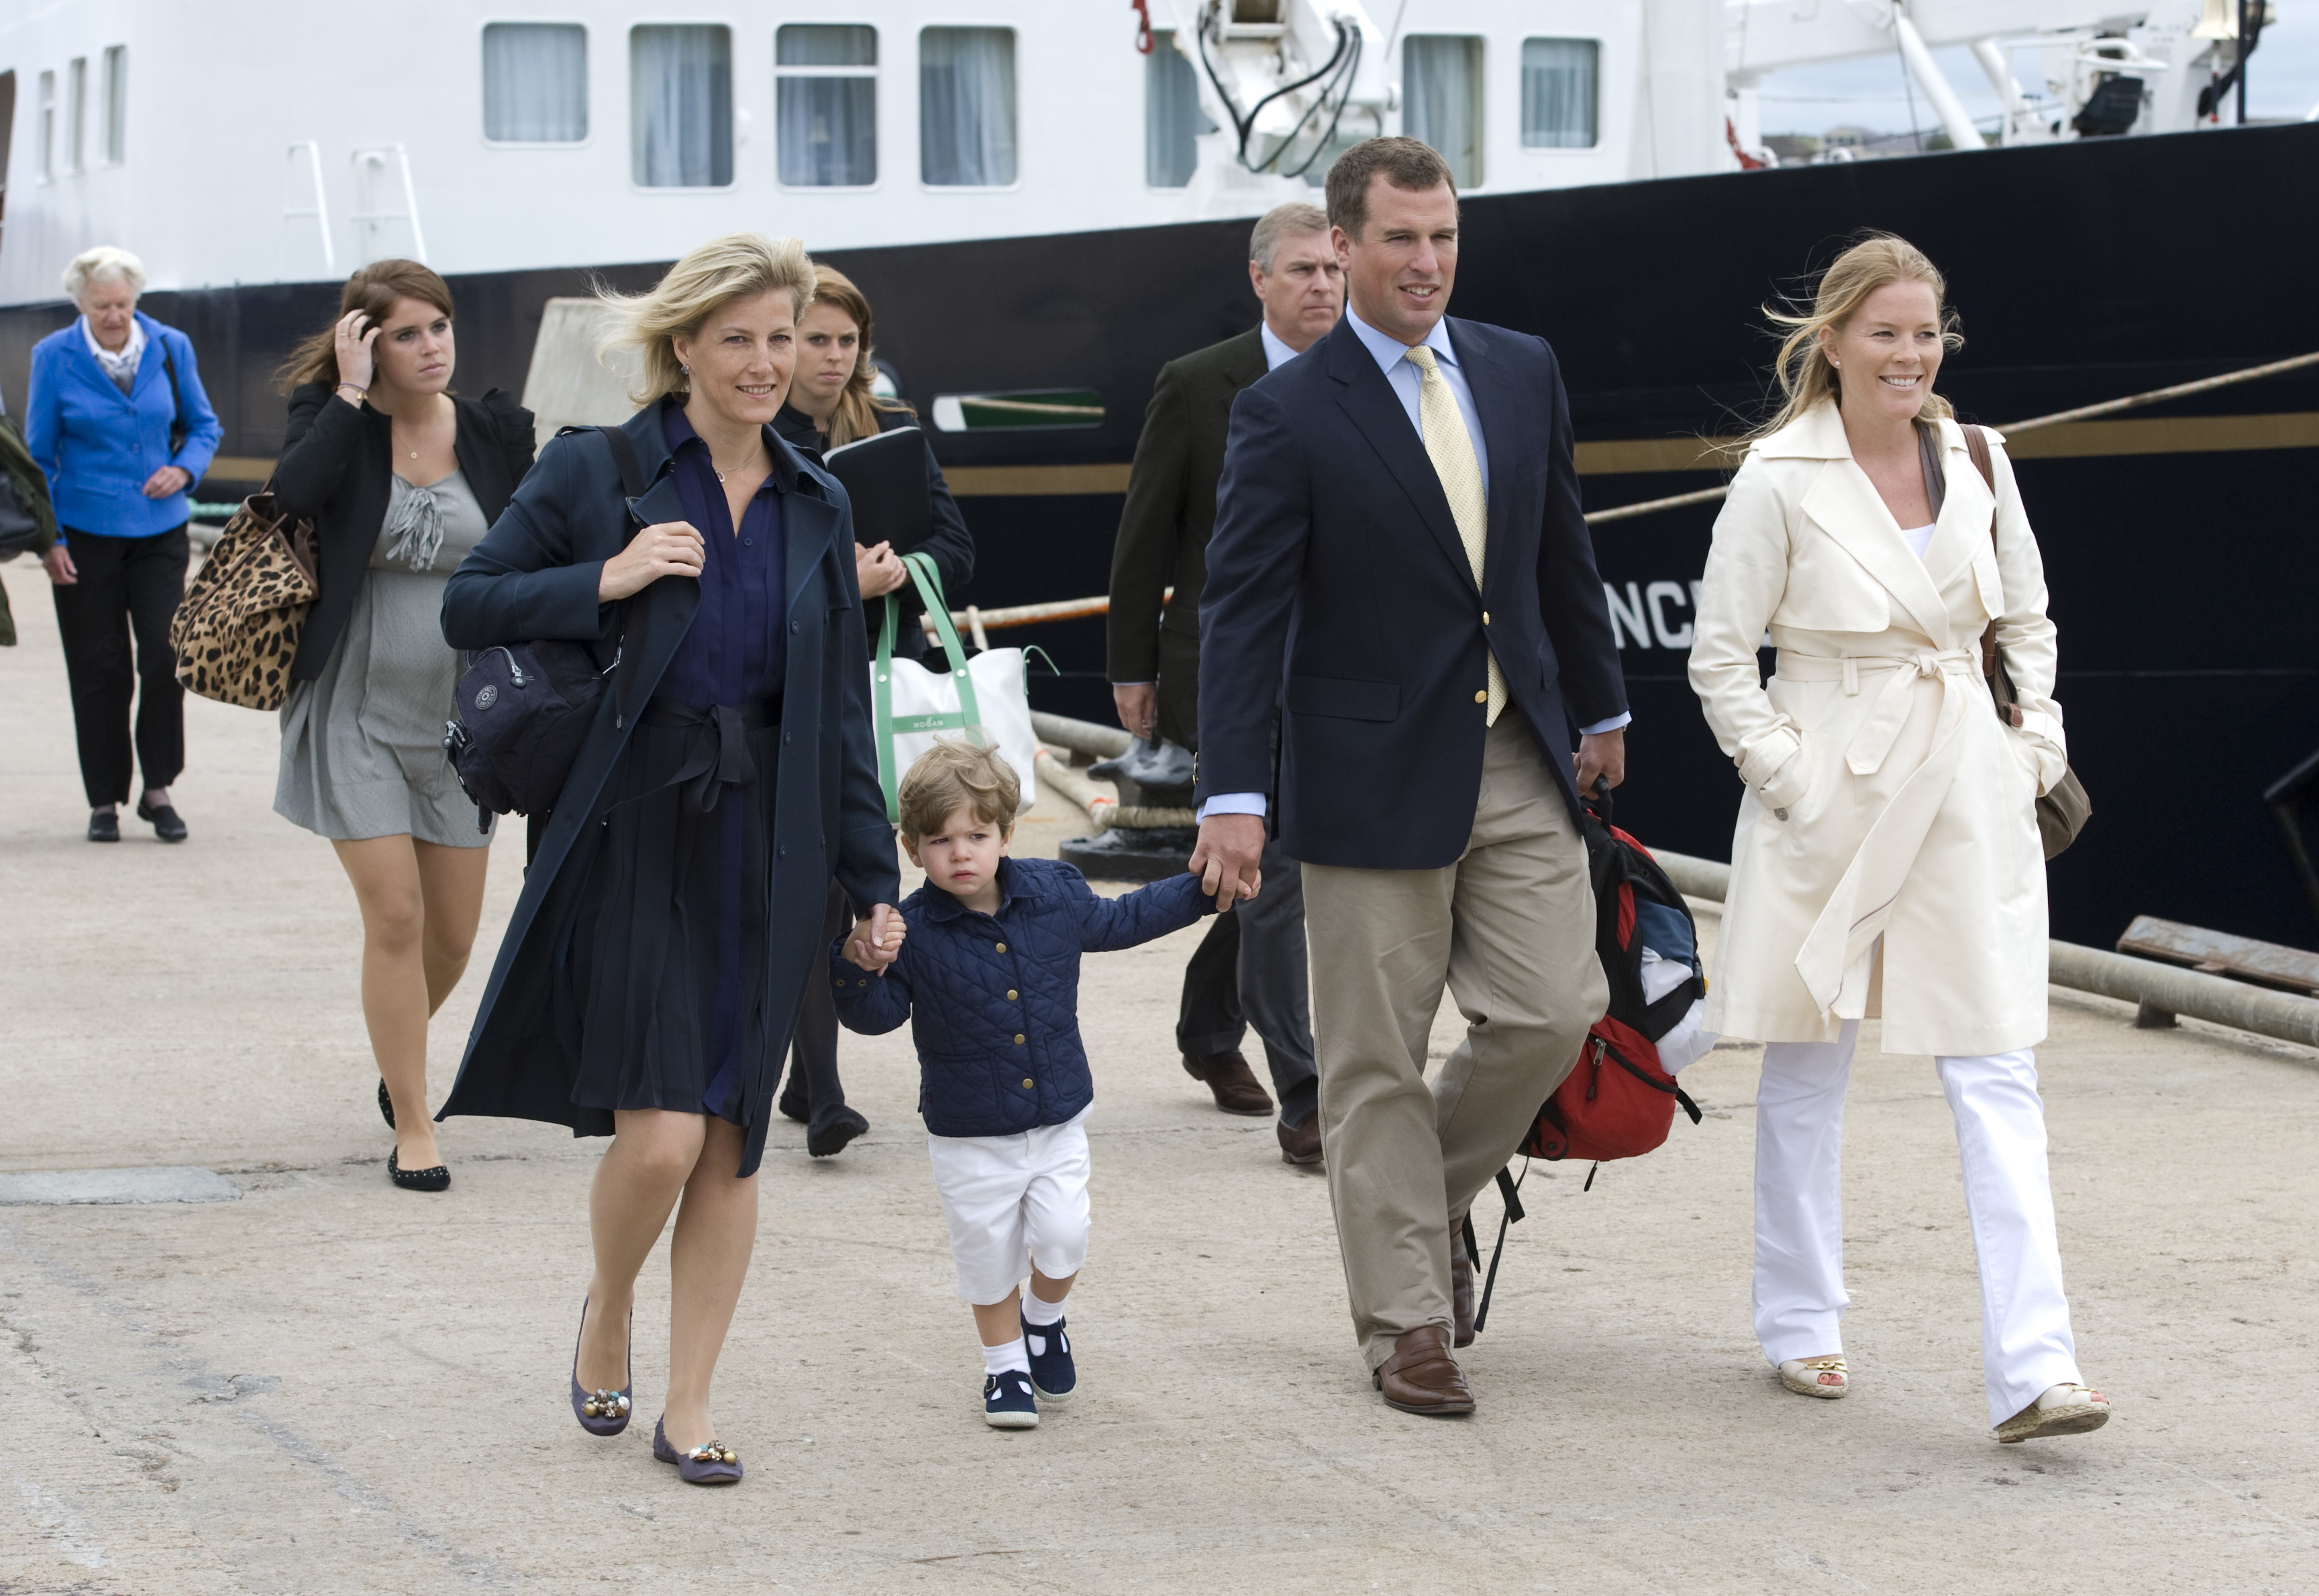 <p>Princess Eugenie, Sophie, Countess of Wessex, Princess Beatrice, James, Viscount Severn, Prince Andrew, Peter Phillips and Autumn Phillips disembarked in Scrabster, Scotland, on Aug. 2, 2010, after joining the queen on a two-week cruise to celebrate the 50th birthday of Prince Andrew and the 60th birthday of Princess Anne.</p>